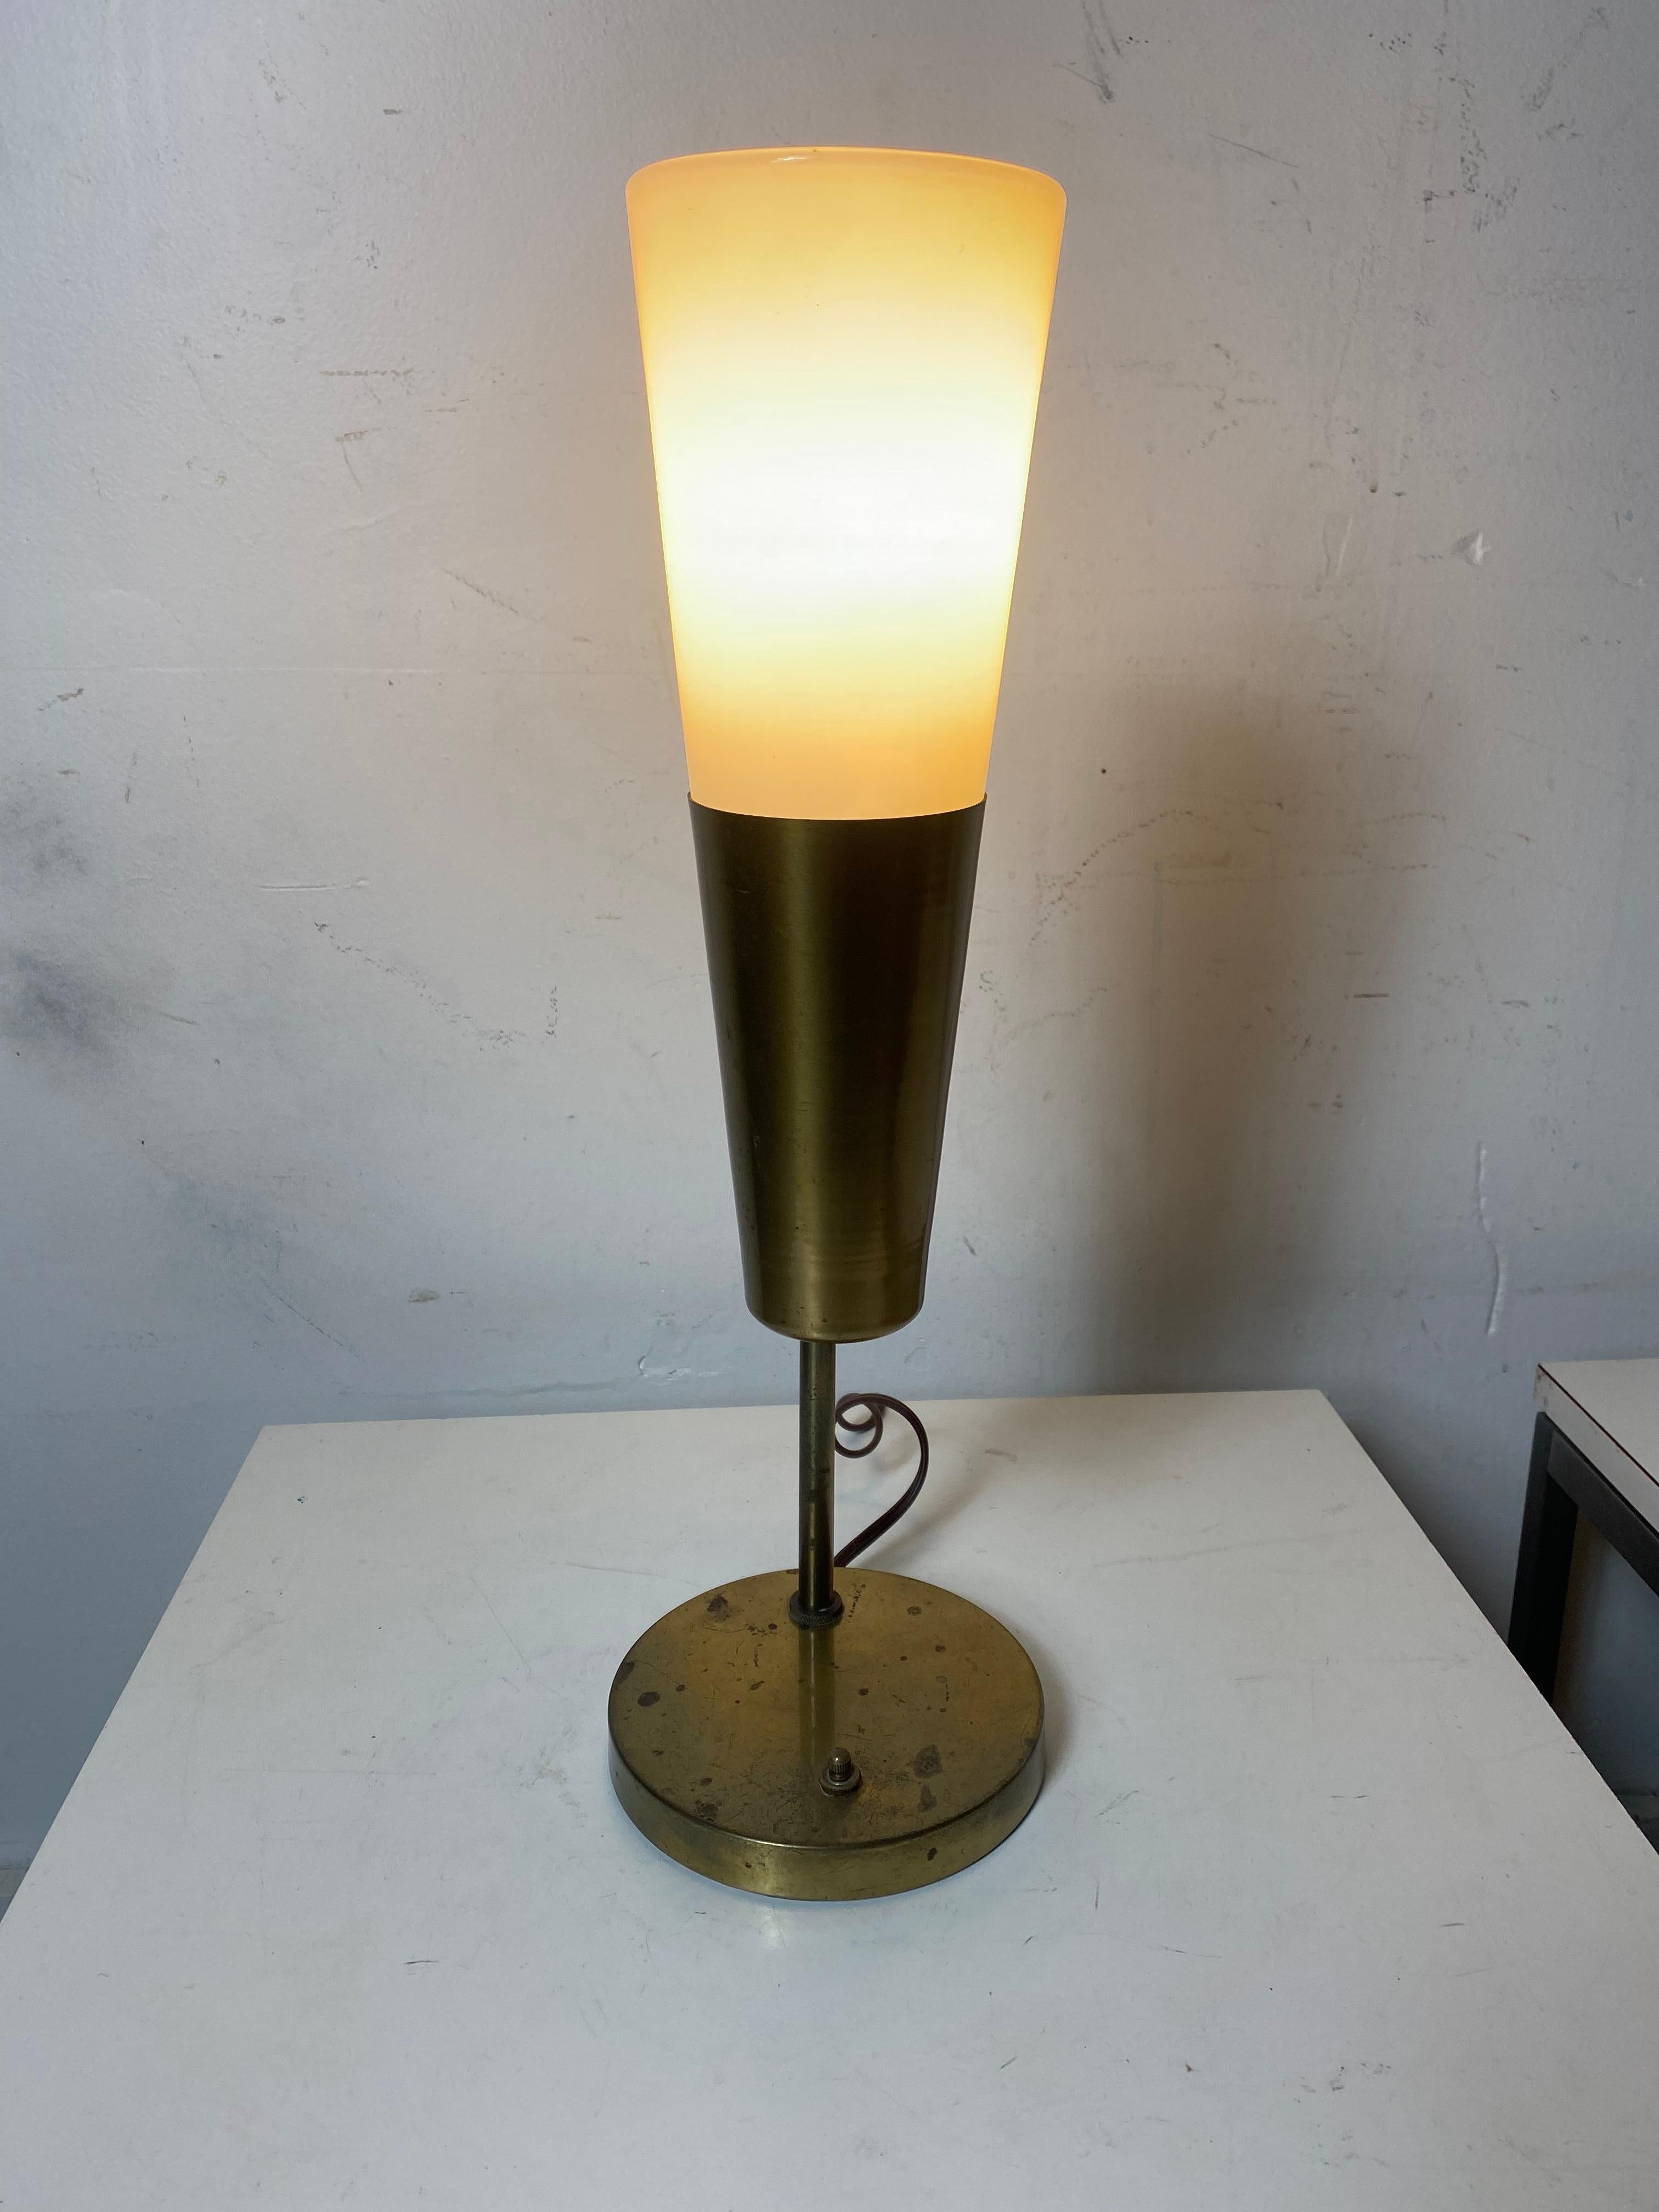 Rare Modernist Brass and Glass Lamp designed by Paul McCobb For Sale 1